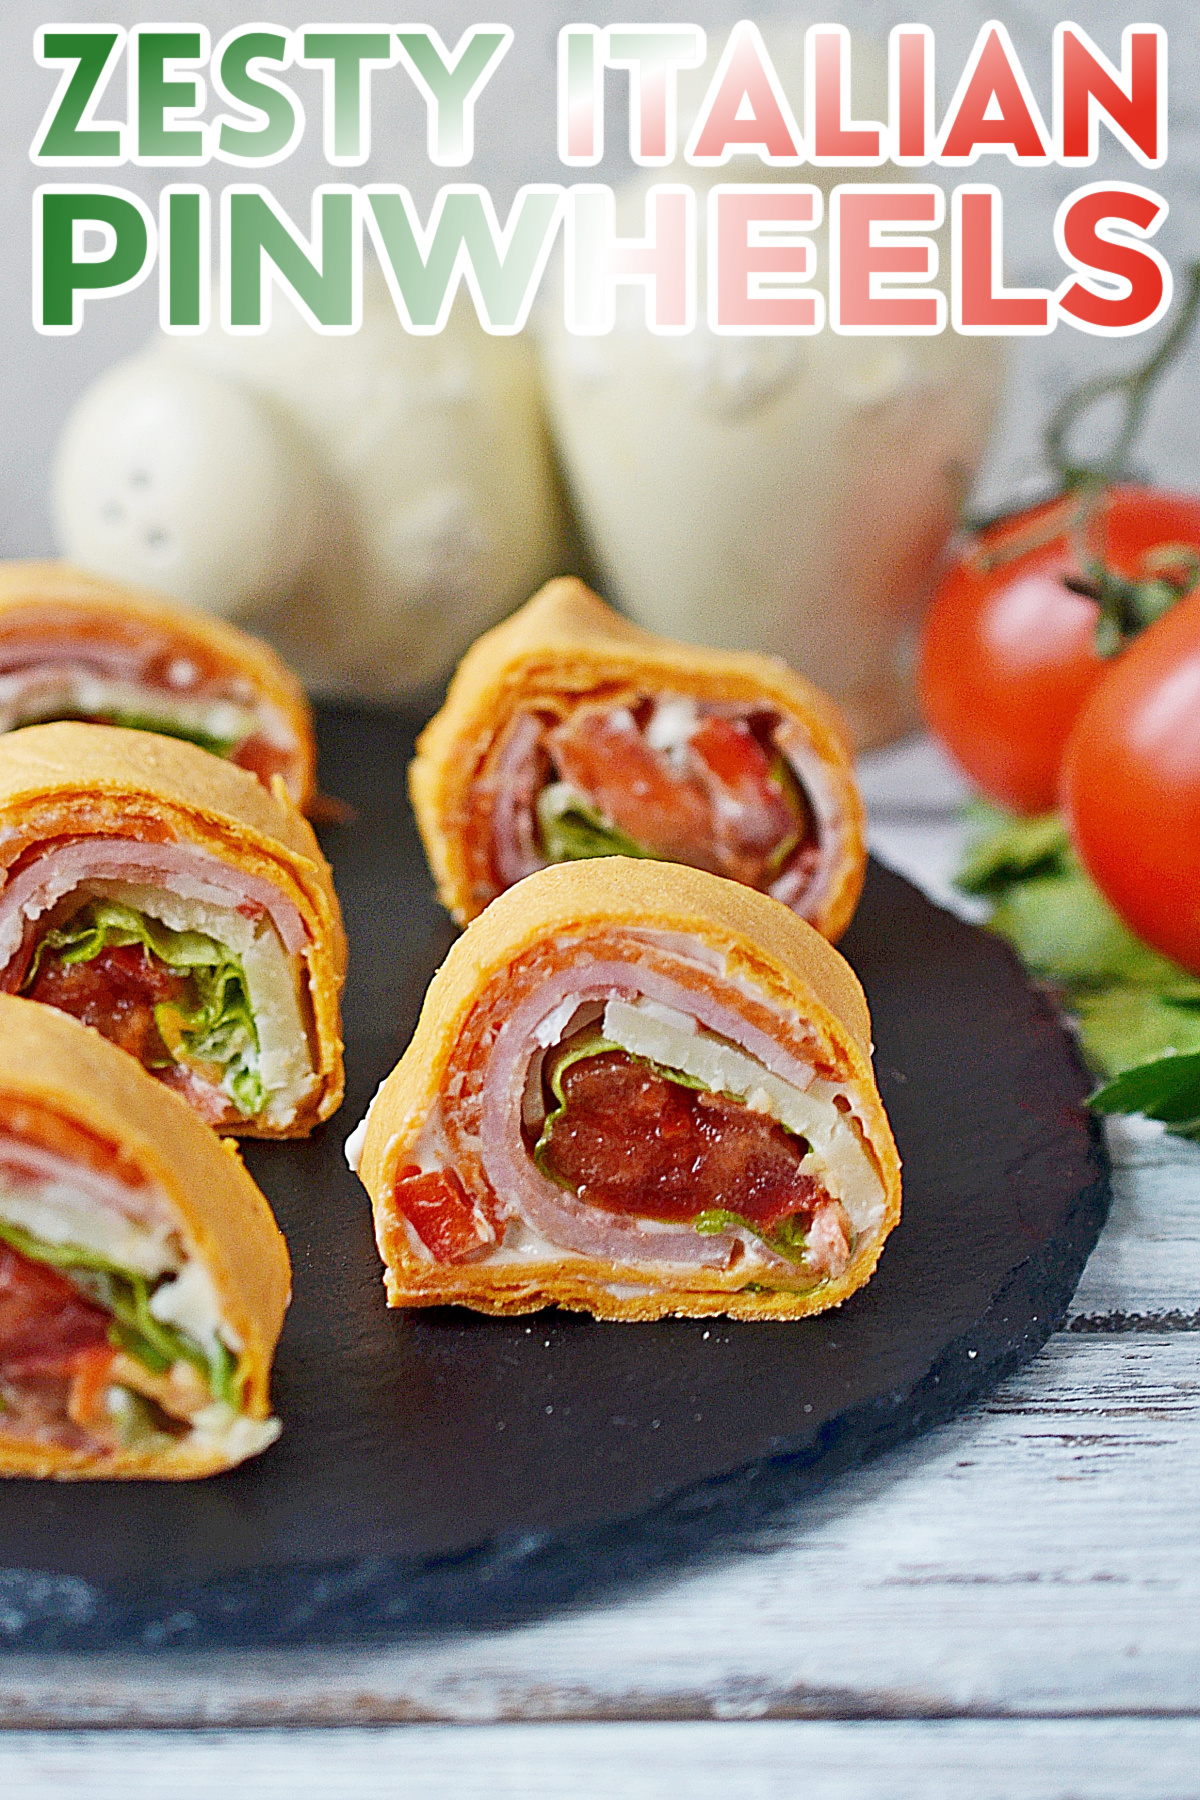 This easy Zesty Italian Pinwheels recipe is perfect for a party, potluck, or even lunch! They're always a hit with kids and adults alike.